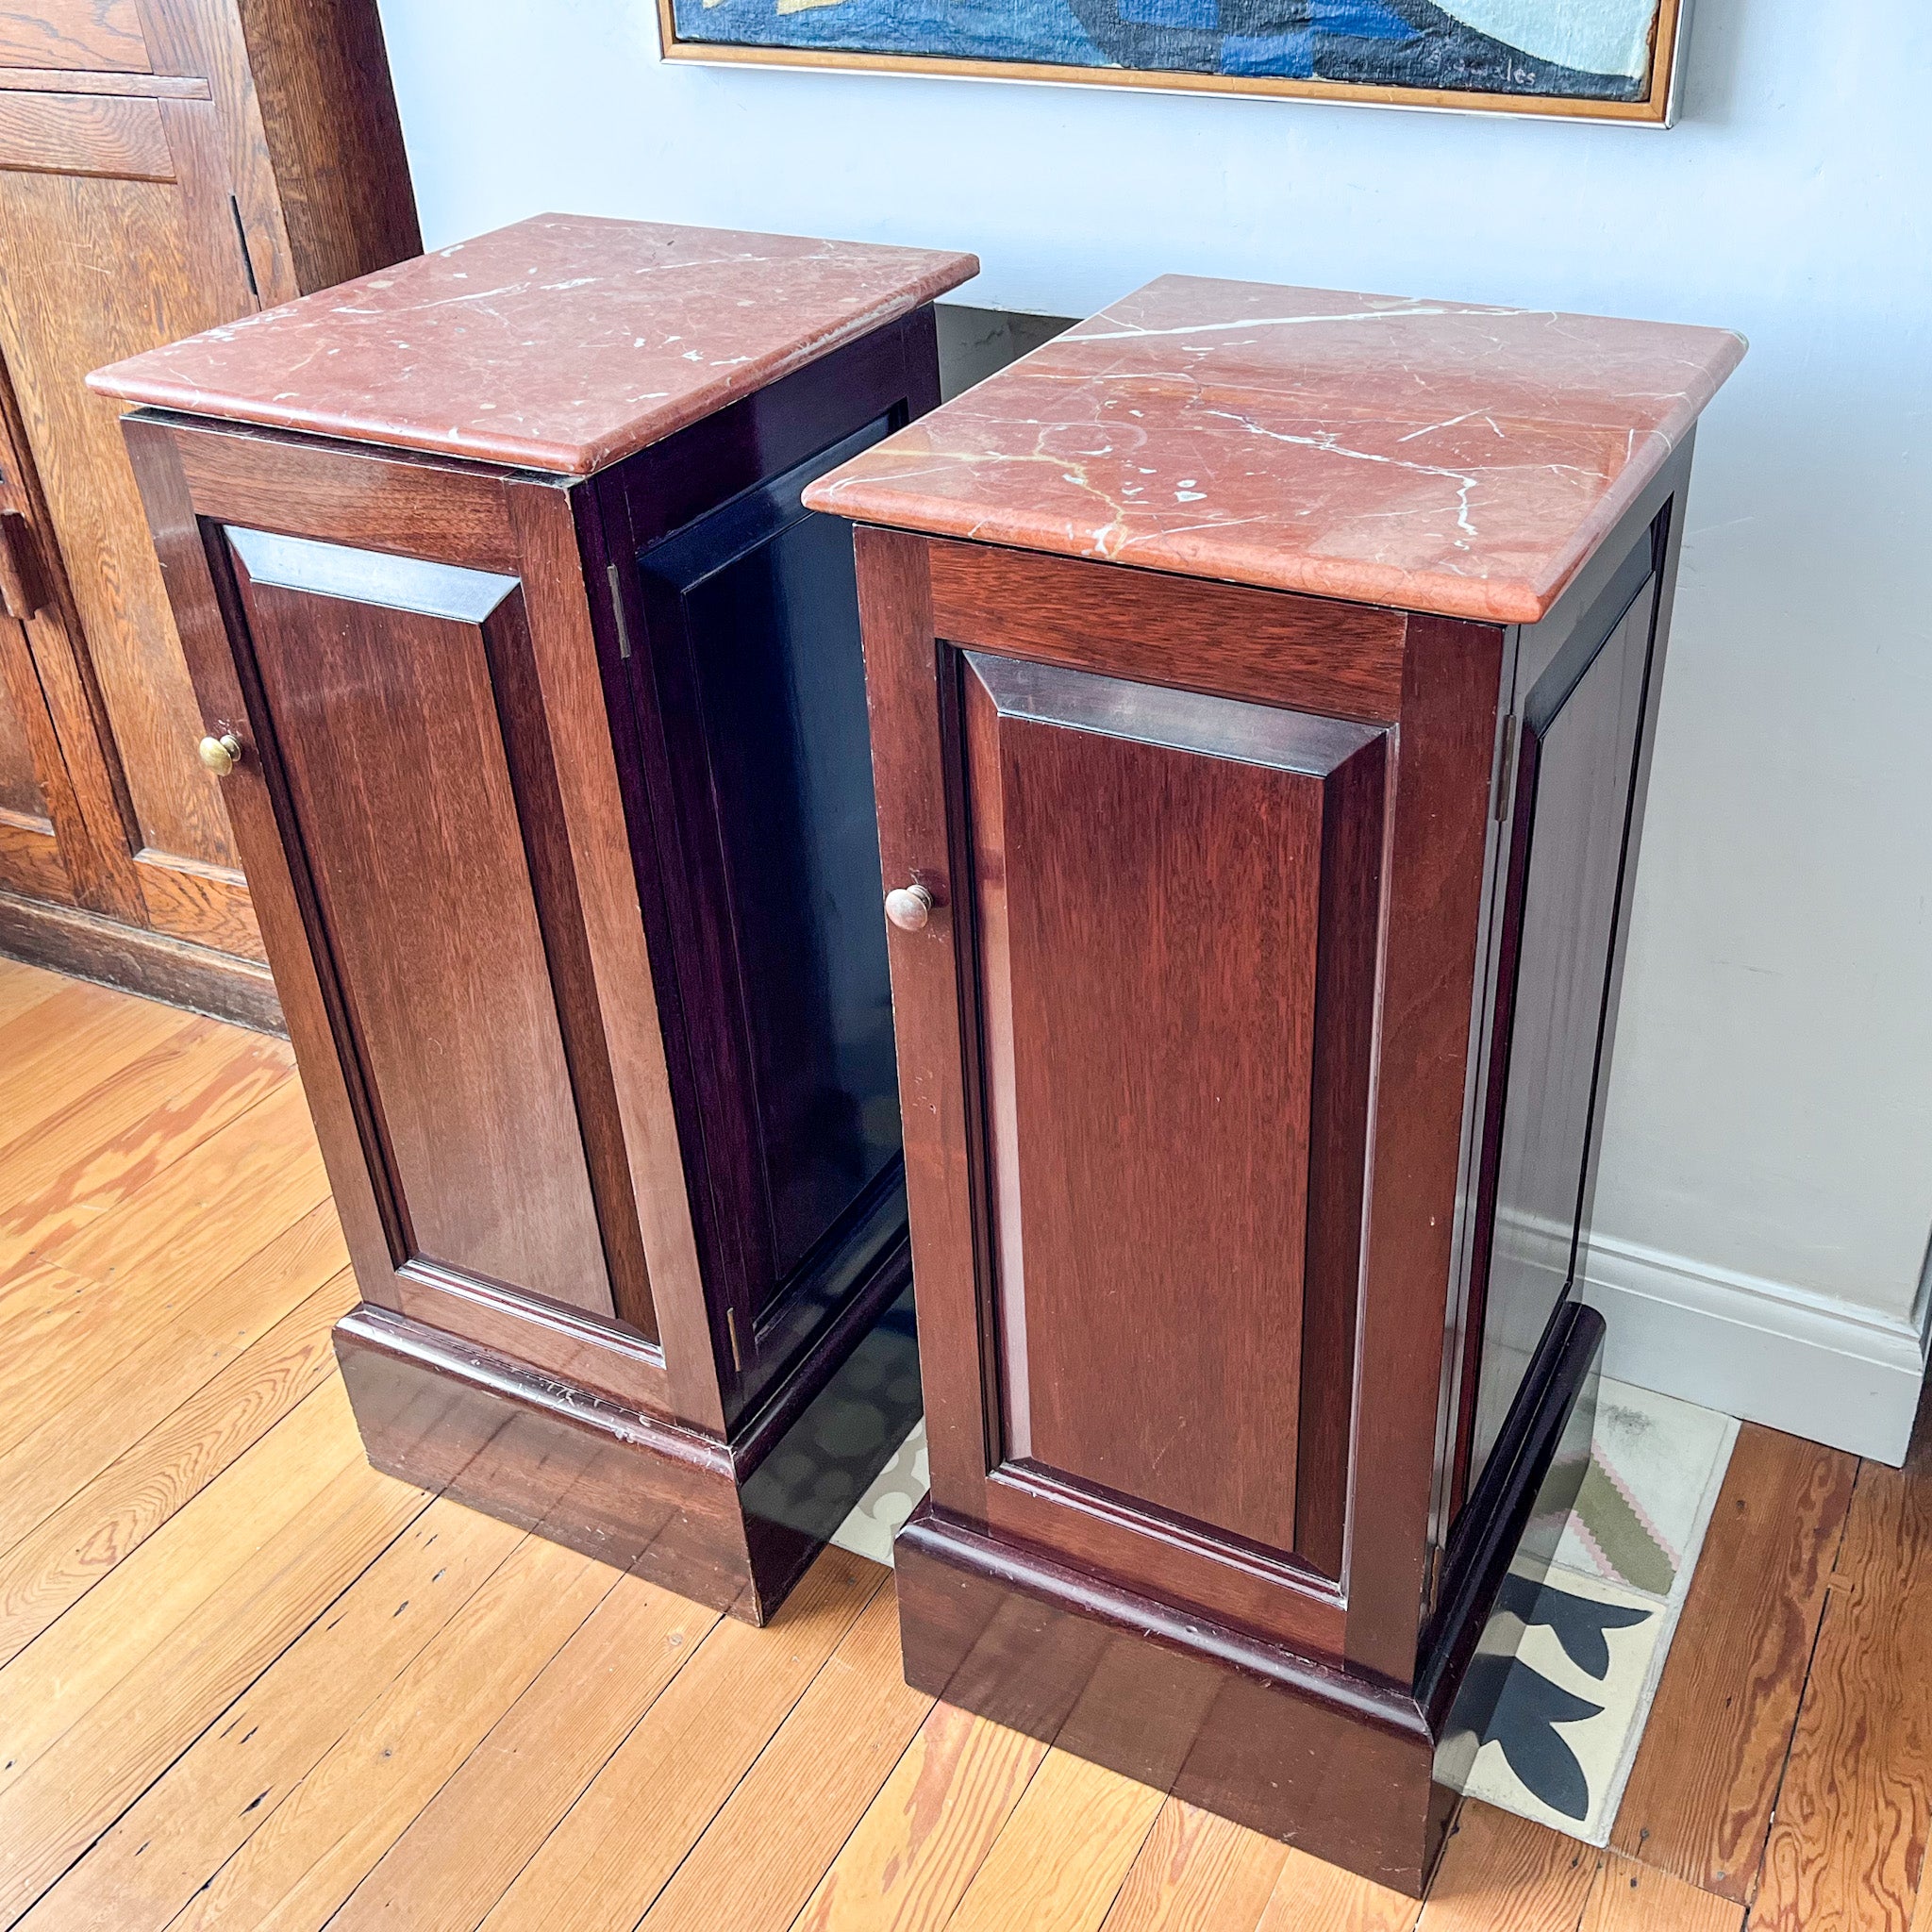 A Pair Of Matching Pot Cupboards / Nightstands With Marble Tops